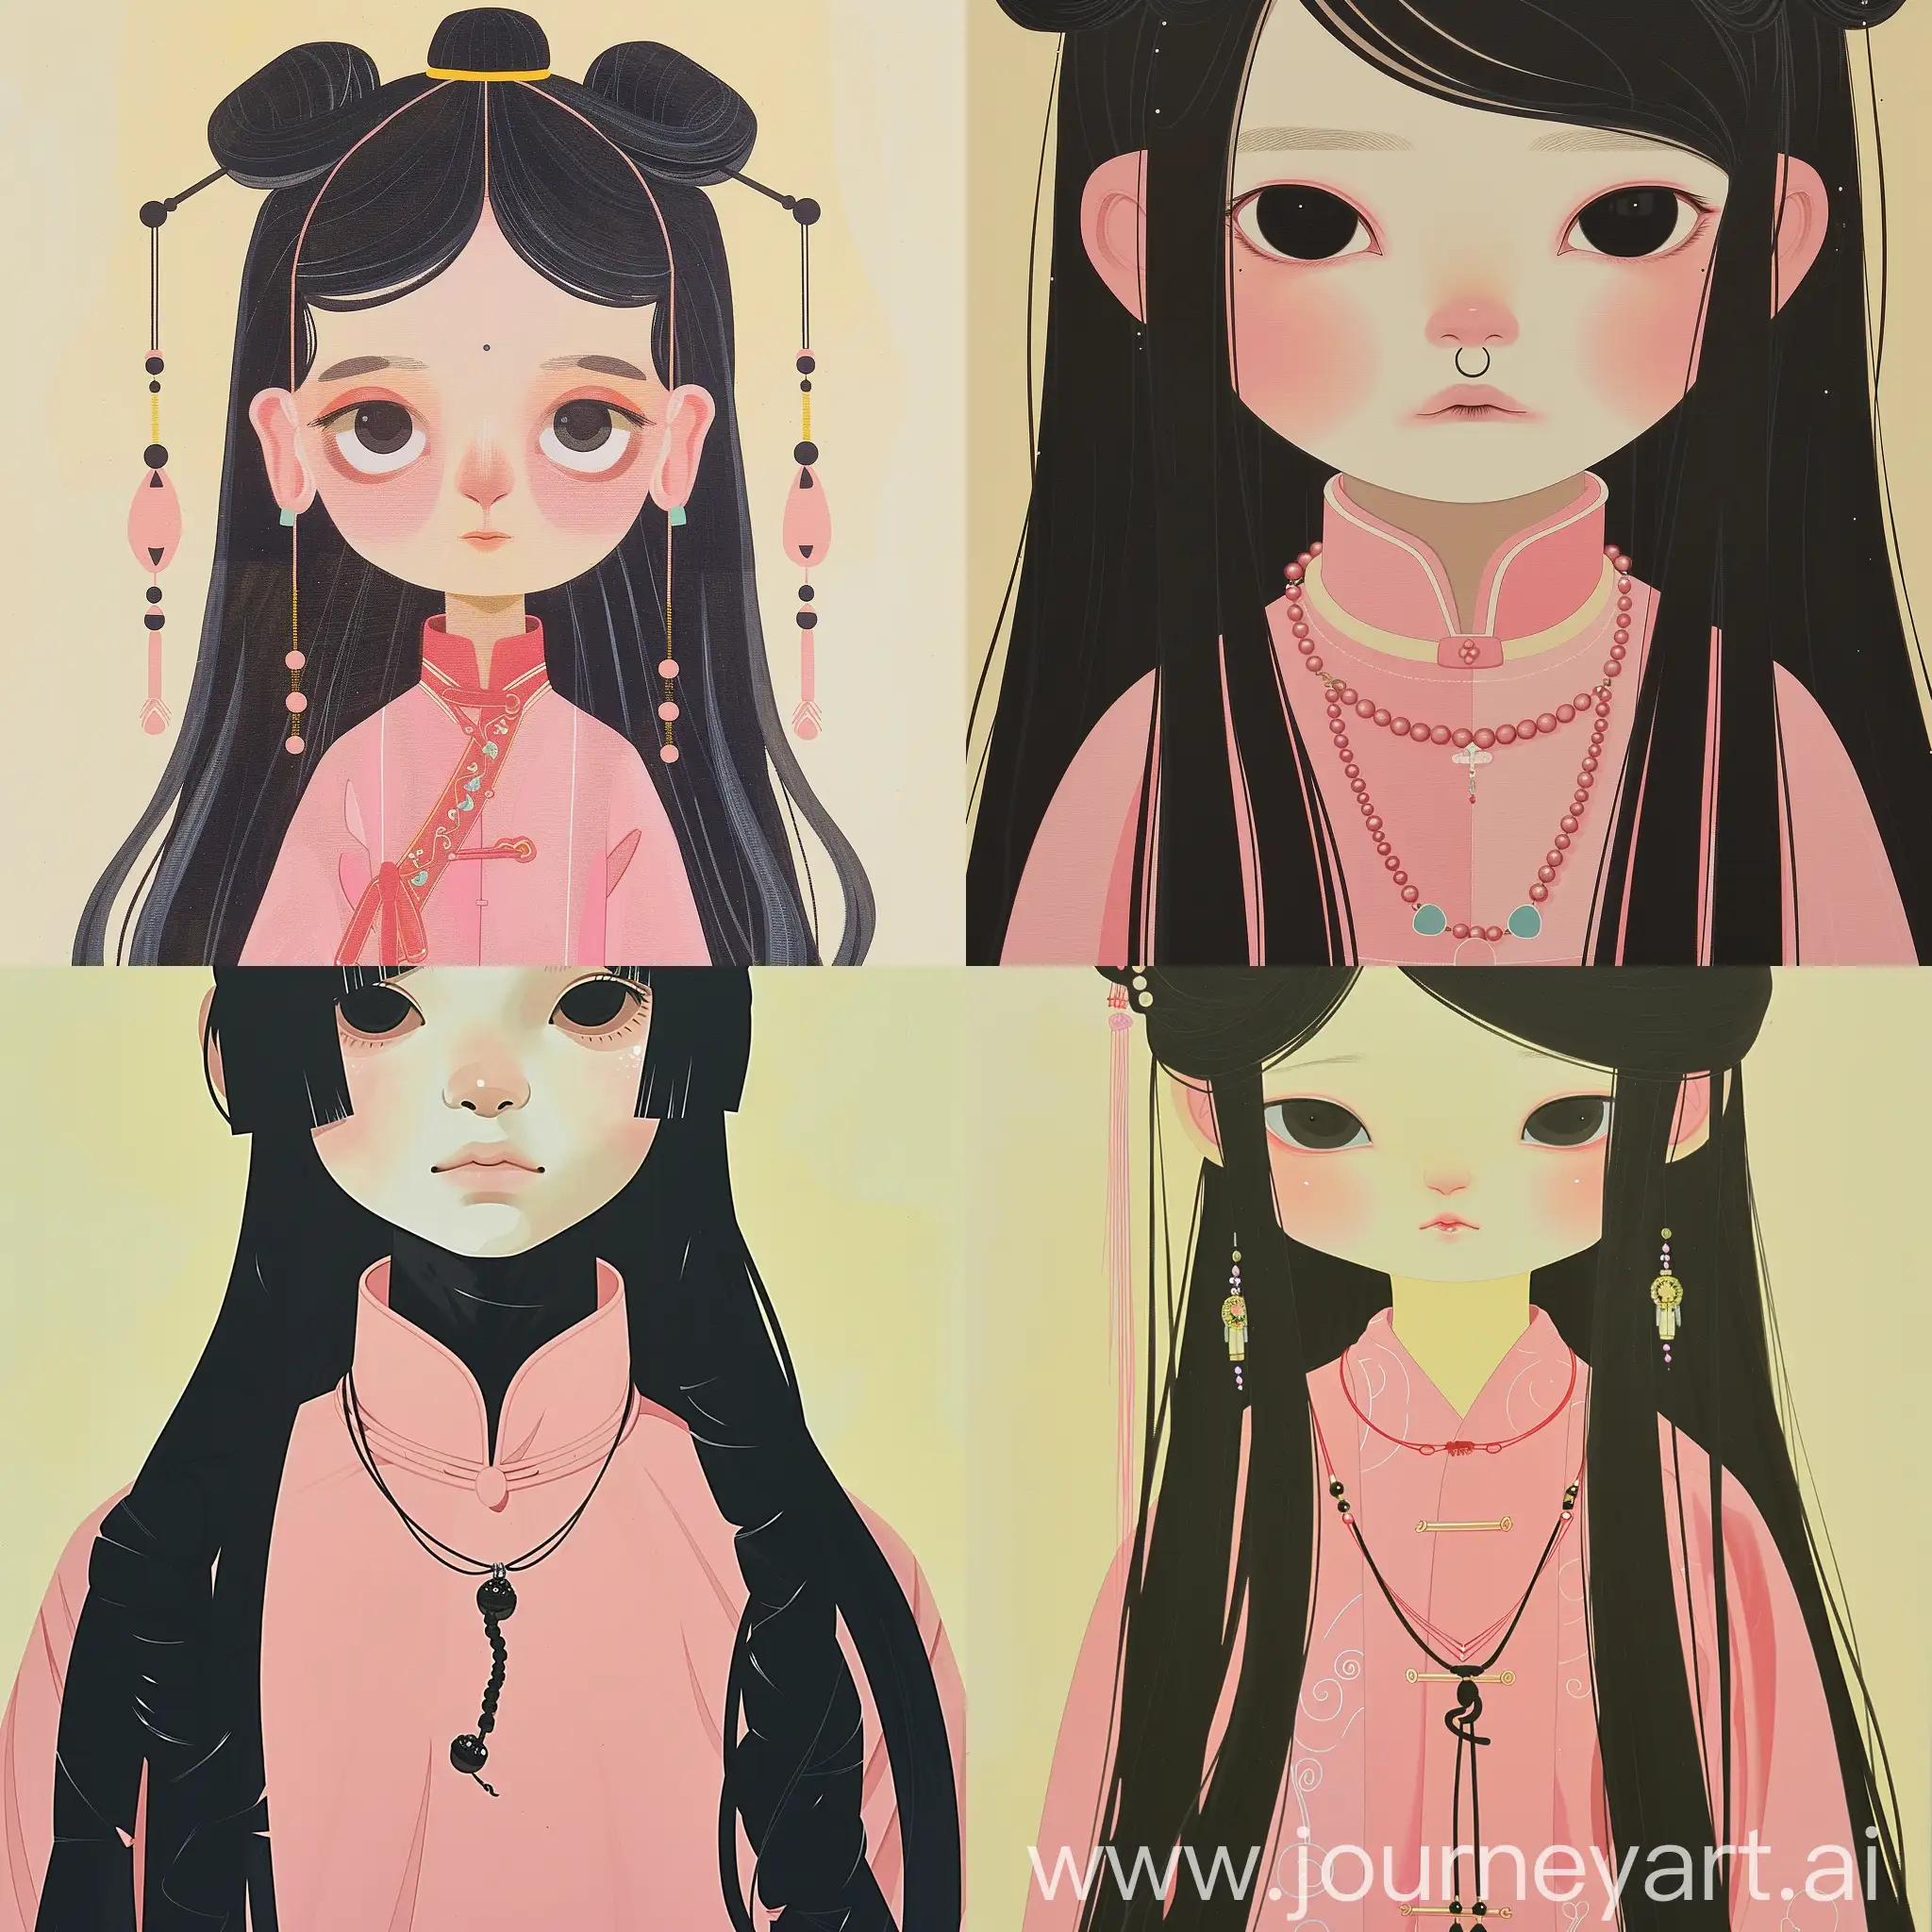 a gongbi painting of a 5 years old black long hair Chinese Qing Dynasty boy wears pink hanfu, tangled jewelry, round face, extremely minimalism portrait, geometric shapes, matte light yellow background, in the style of crisp neo-pop illustrations, animated gifs, dolly kei, cartoon-like characters, close-up, head view, bold, cartoonish lithographs